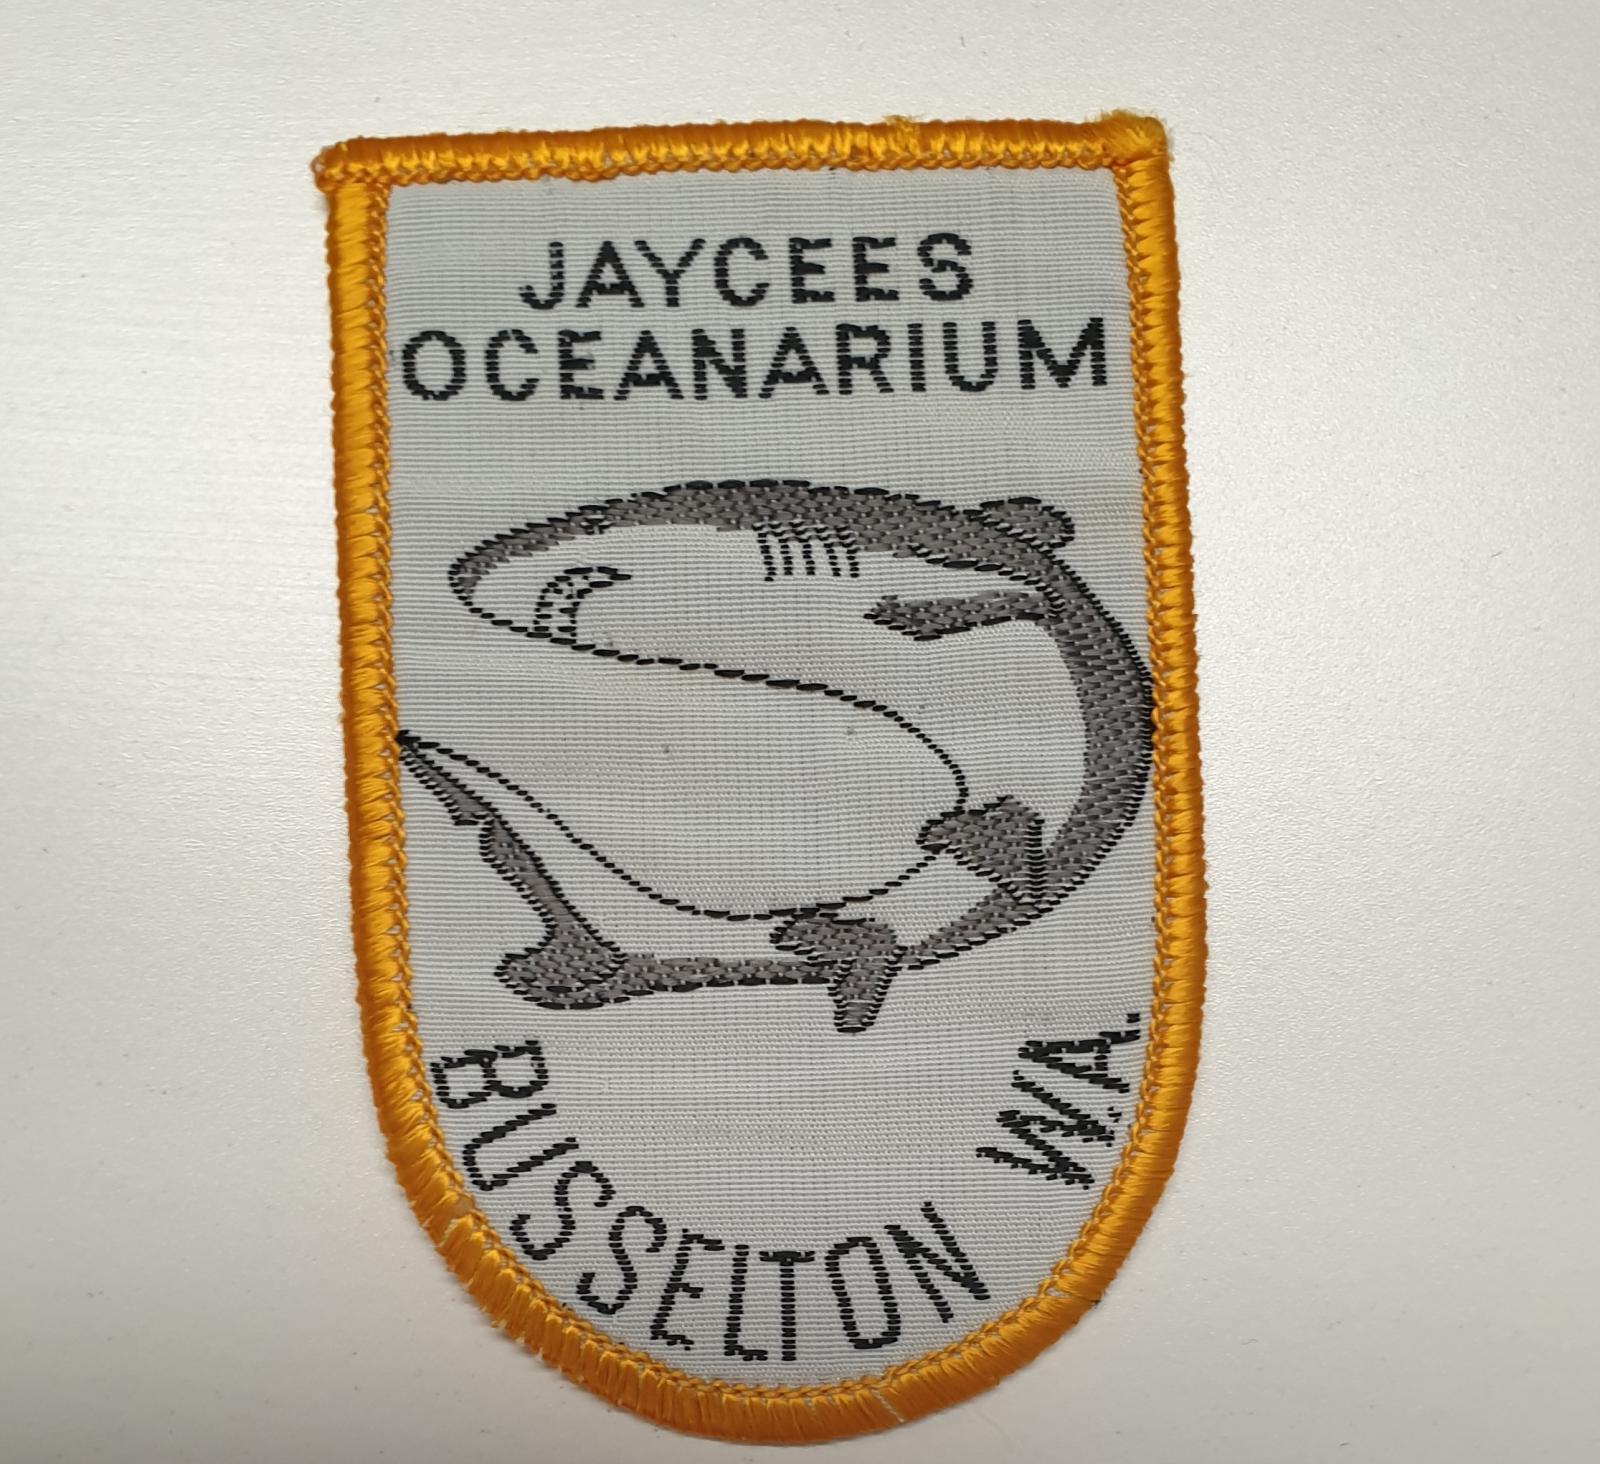 embroided badge souvenir from Jaycees Oceanarium. There is a yellow border with a shark in the middle. The worlds :Jaycees Oceanarium Busselton W.A. appear above and below the shark. 